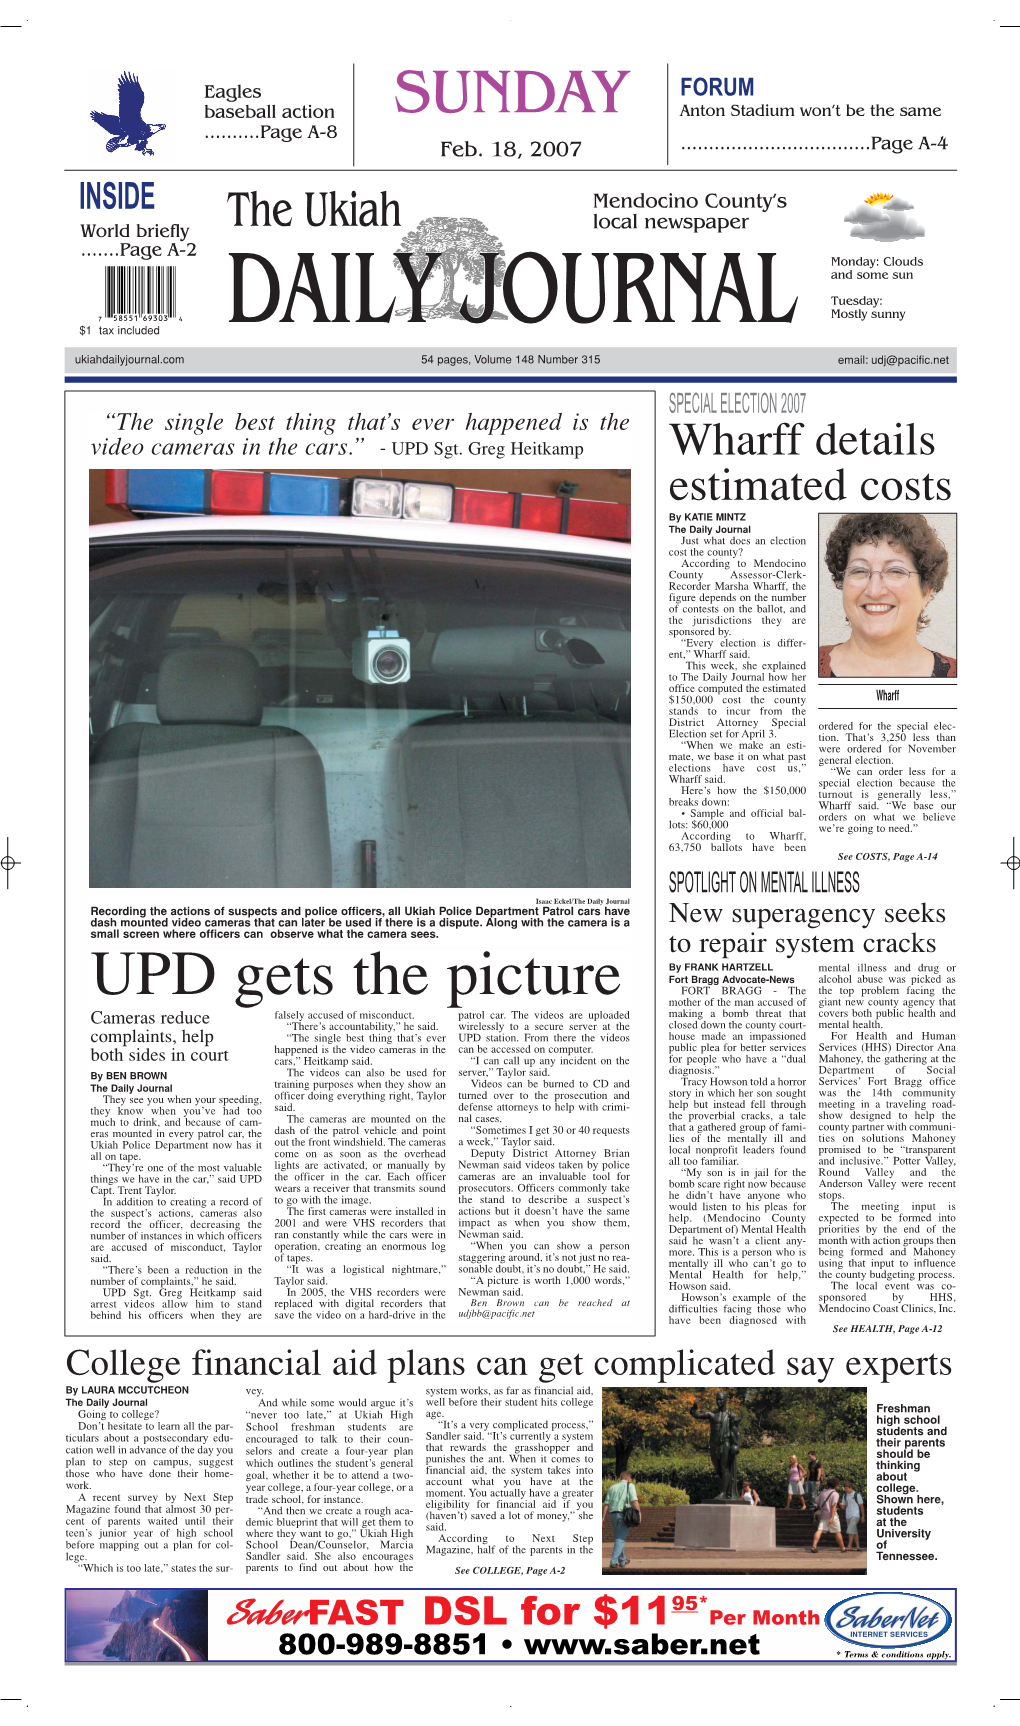 UPD Gets the Picture FORT BRAGG - the the Top Problem Facing the Mother of the Man Accused of Giant New County Agency That Falsely Accused of Misconduct